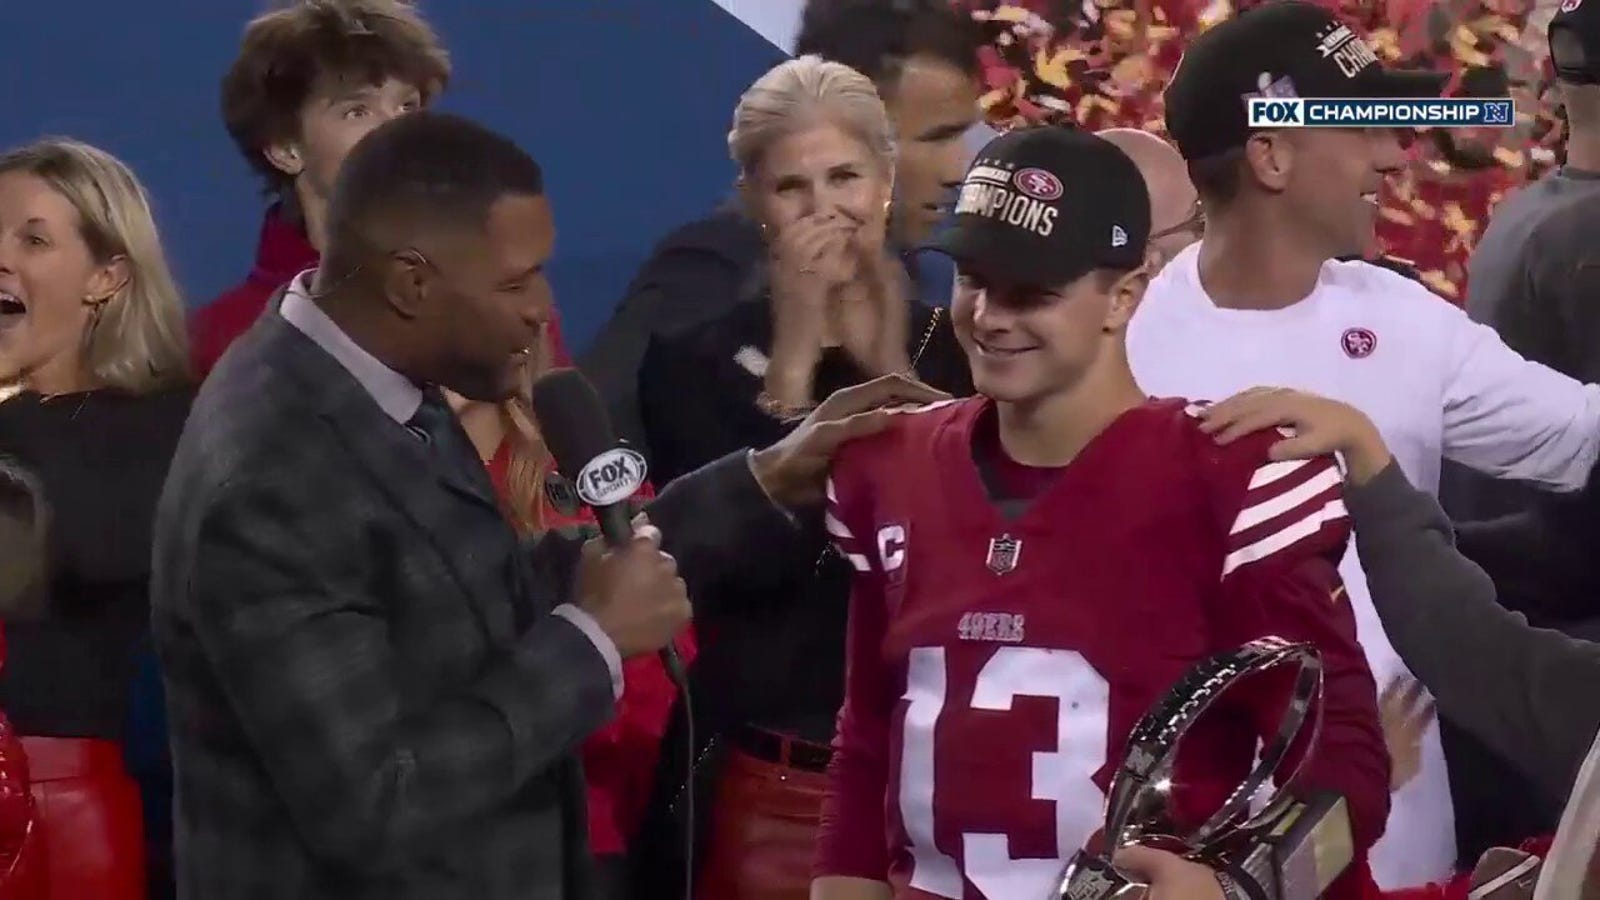 49ers postgame trophy ceremony after defeating Lions in NFC Championship Game